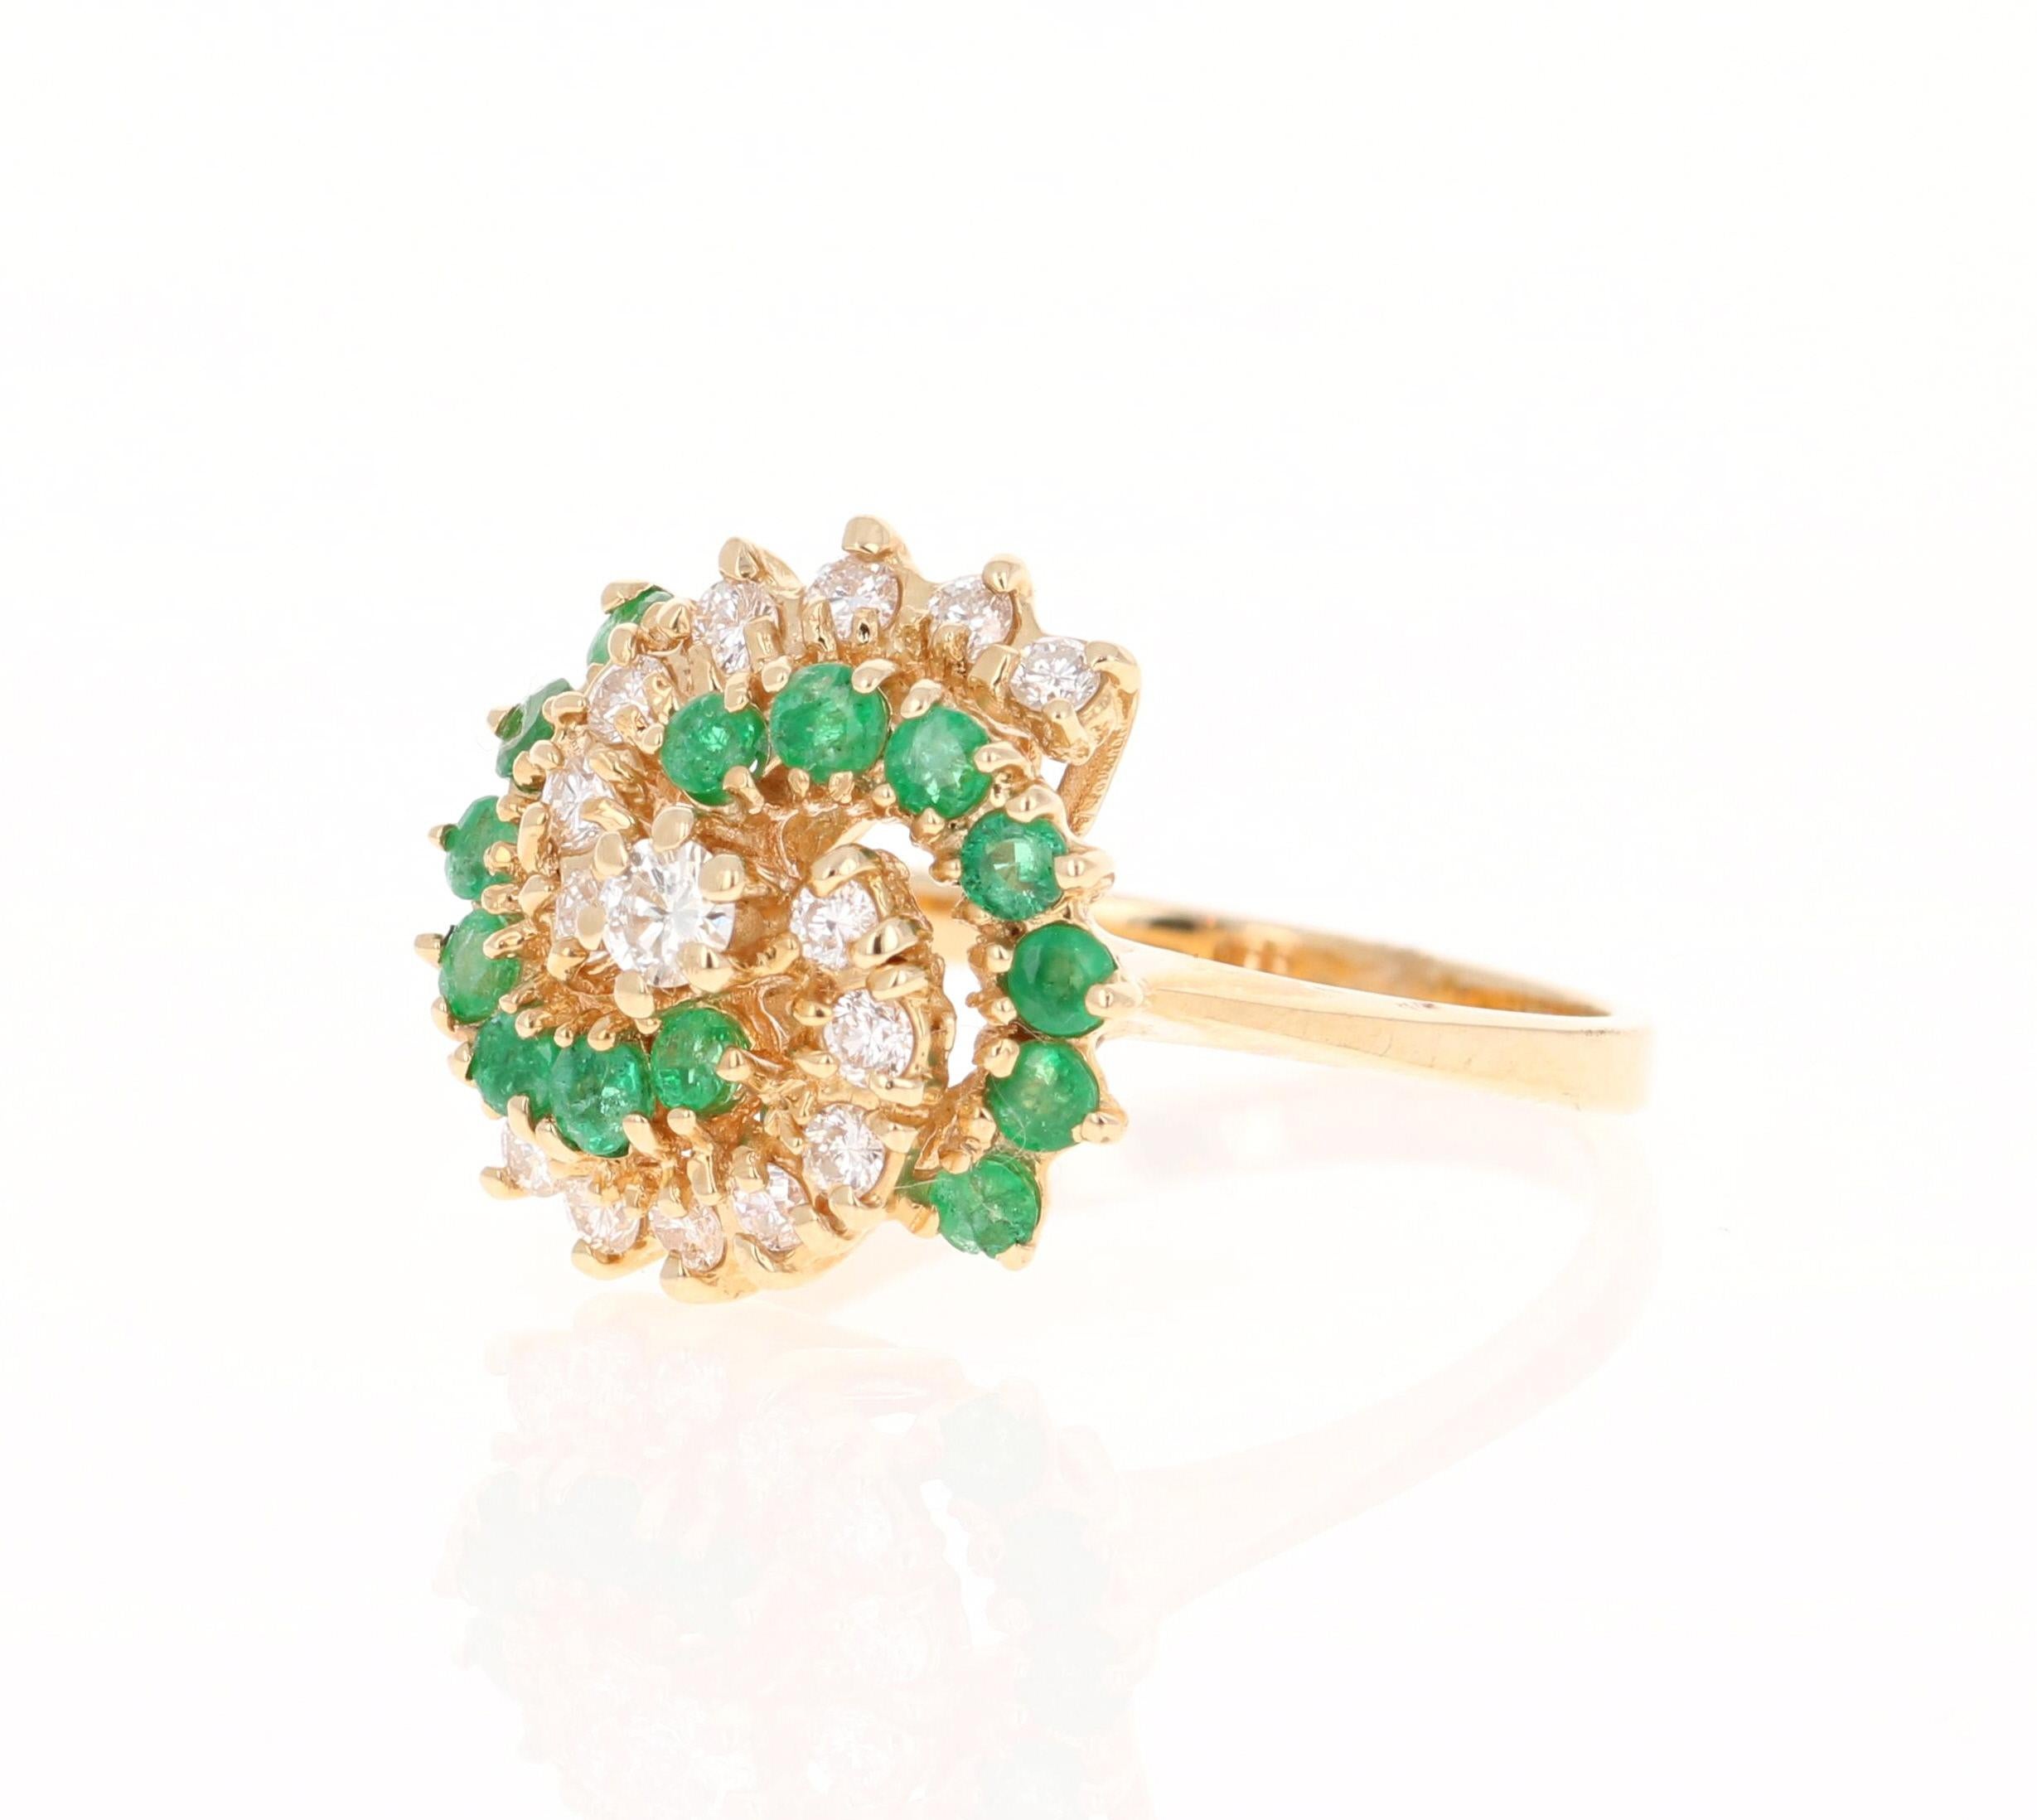 This ring has 14 Round Cut Natural Emeralds that weigh 0.40 carats and 15 Round Cut Natural Diamonds that weigh 0.50 carats. 
The Total Carat Weight of the ring is 0.90 Carats. It is set in 14K Yellow Gold and is 4.5 grams. 

The ring is a size 7